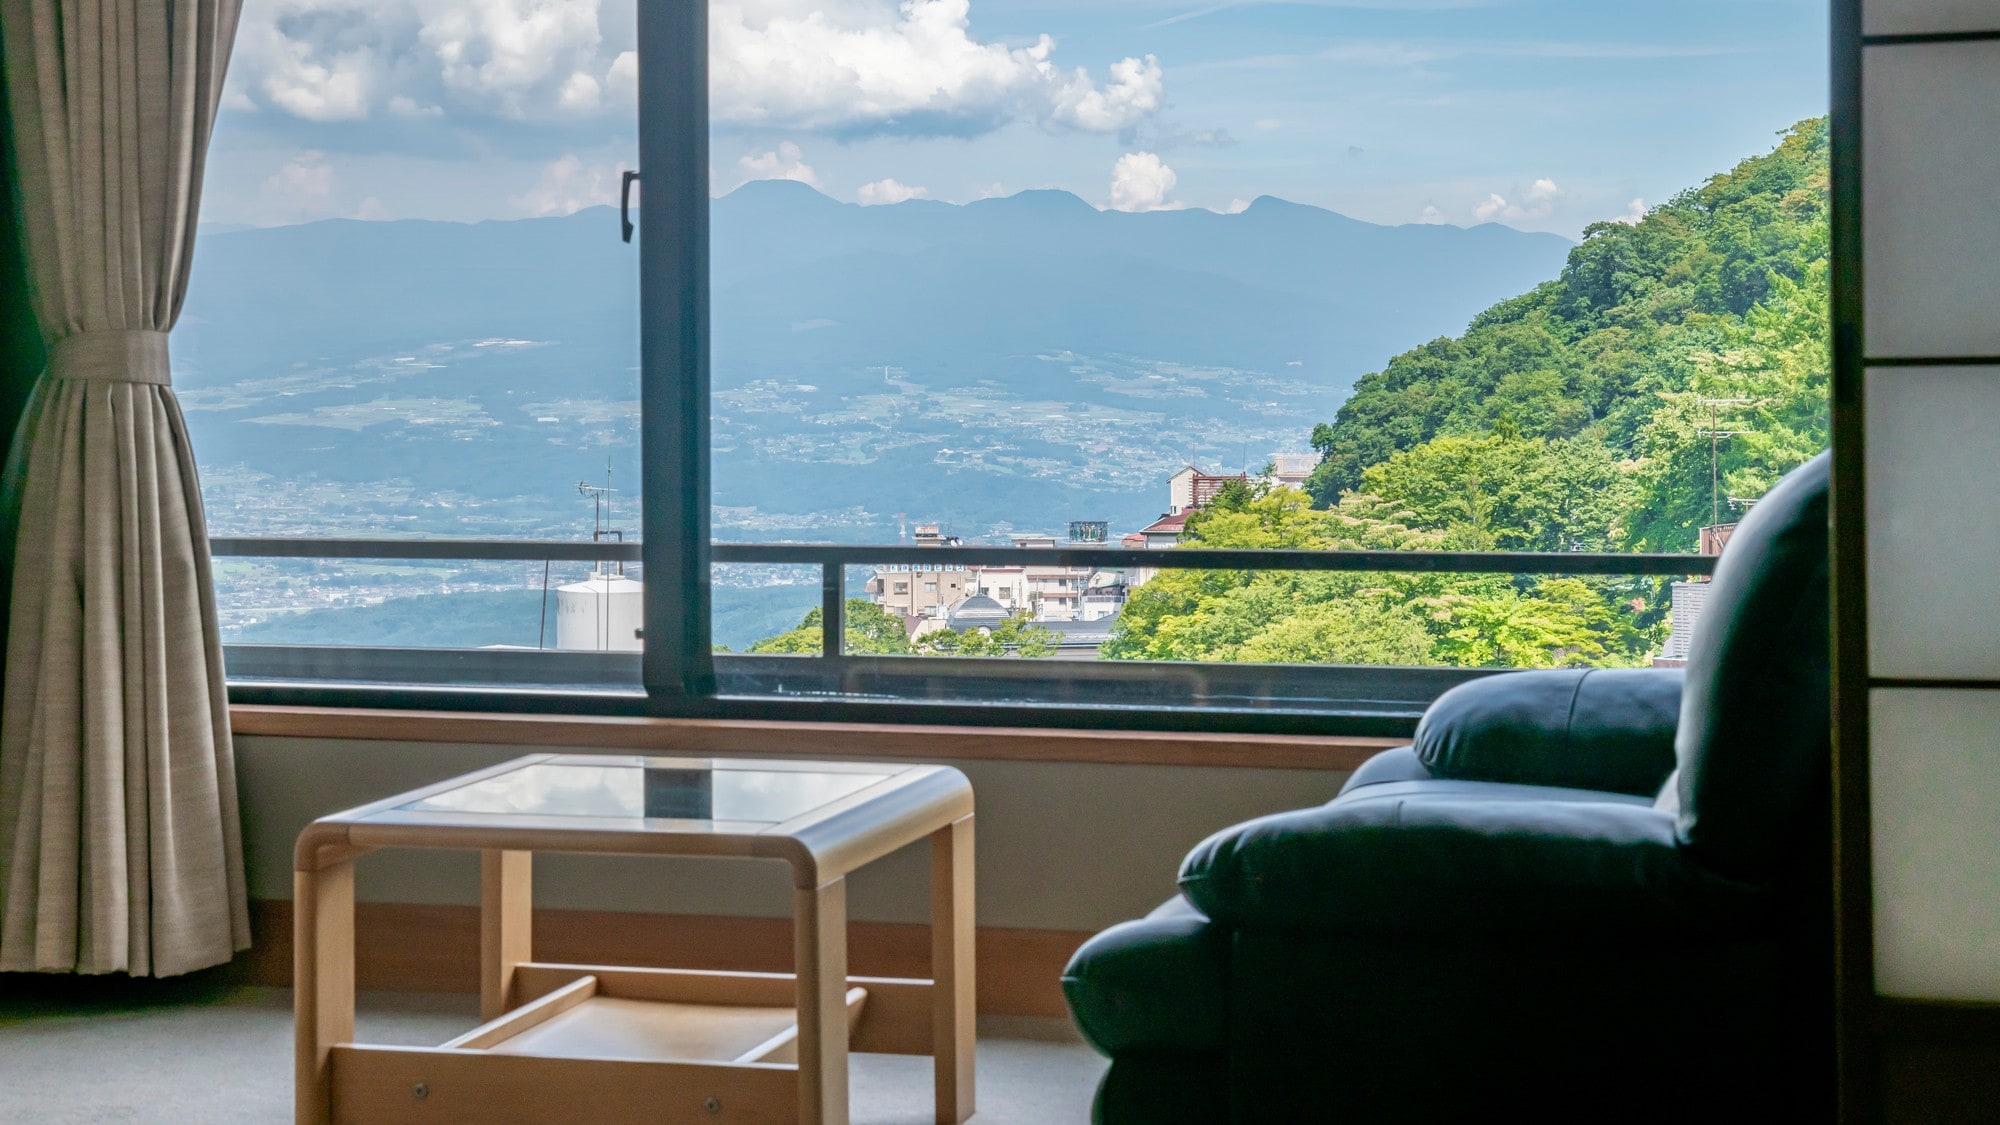 From the room on the stone steps side, you can enjoy the view of the city of Ikaho from above.